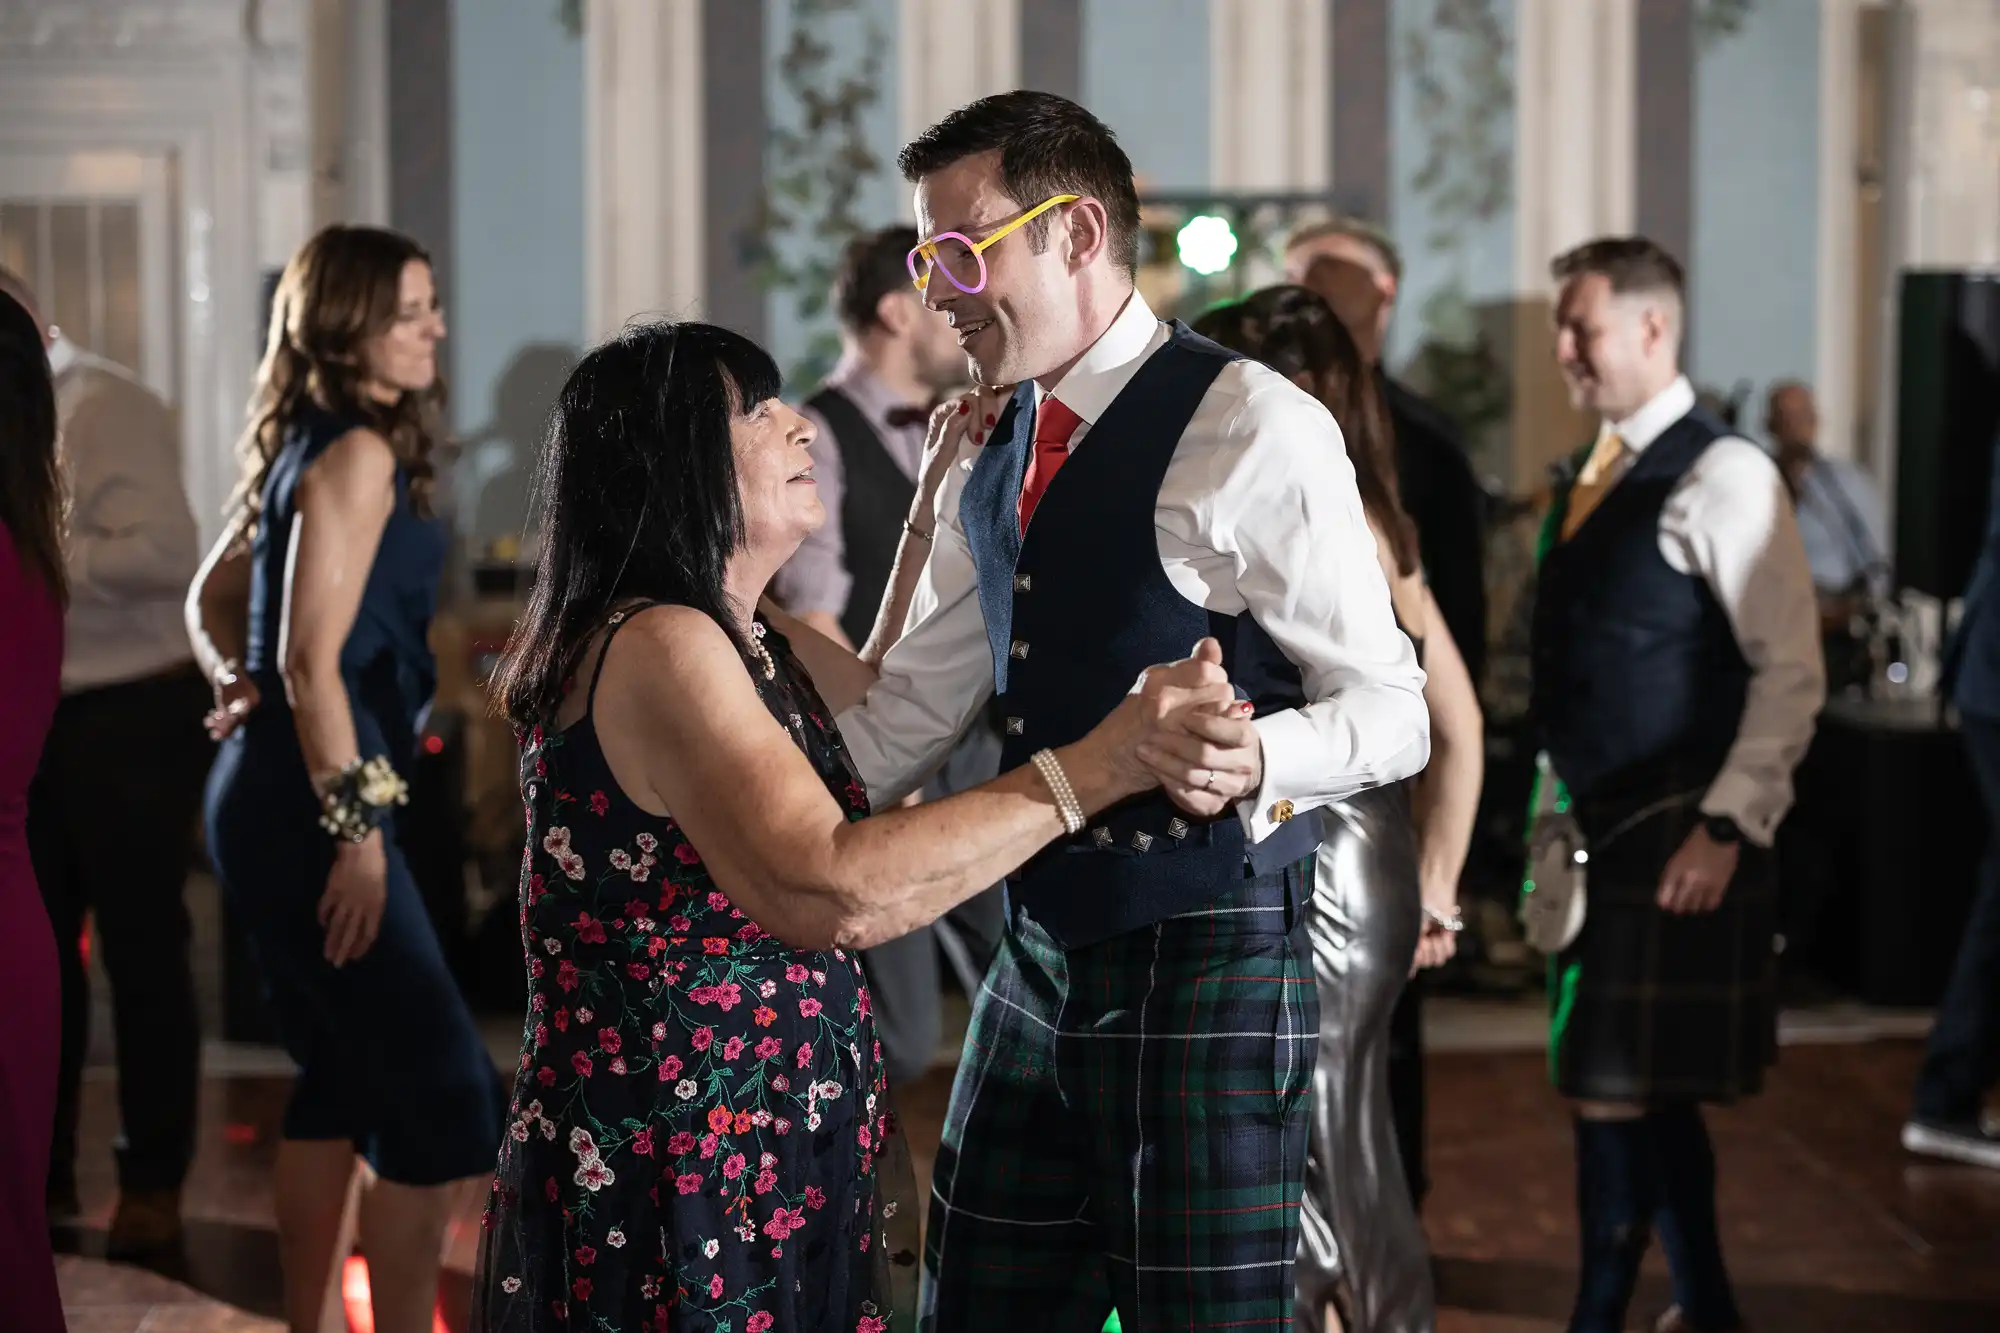 People dancing at an indoor event; a man in a vest and red tie wearing yellow glasses is dancing with a woman in a floral dress. Others are visible in the background.